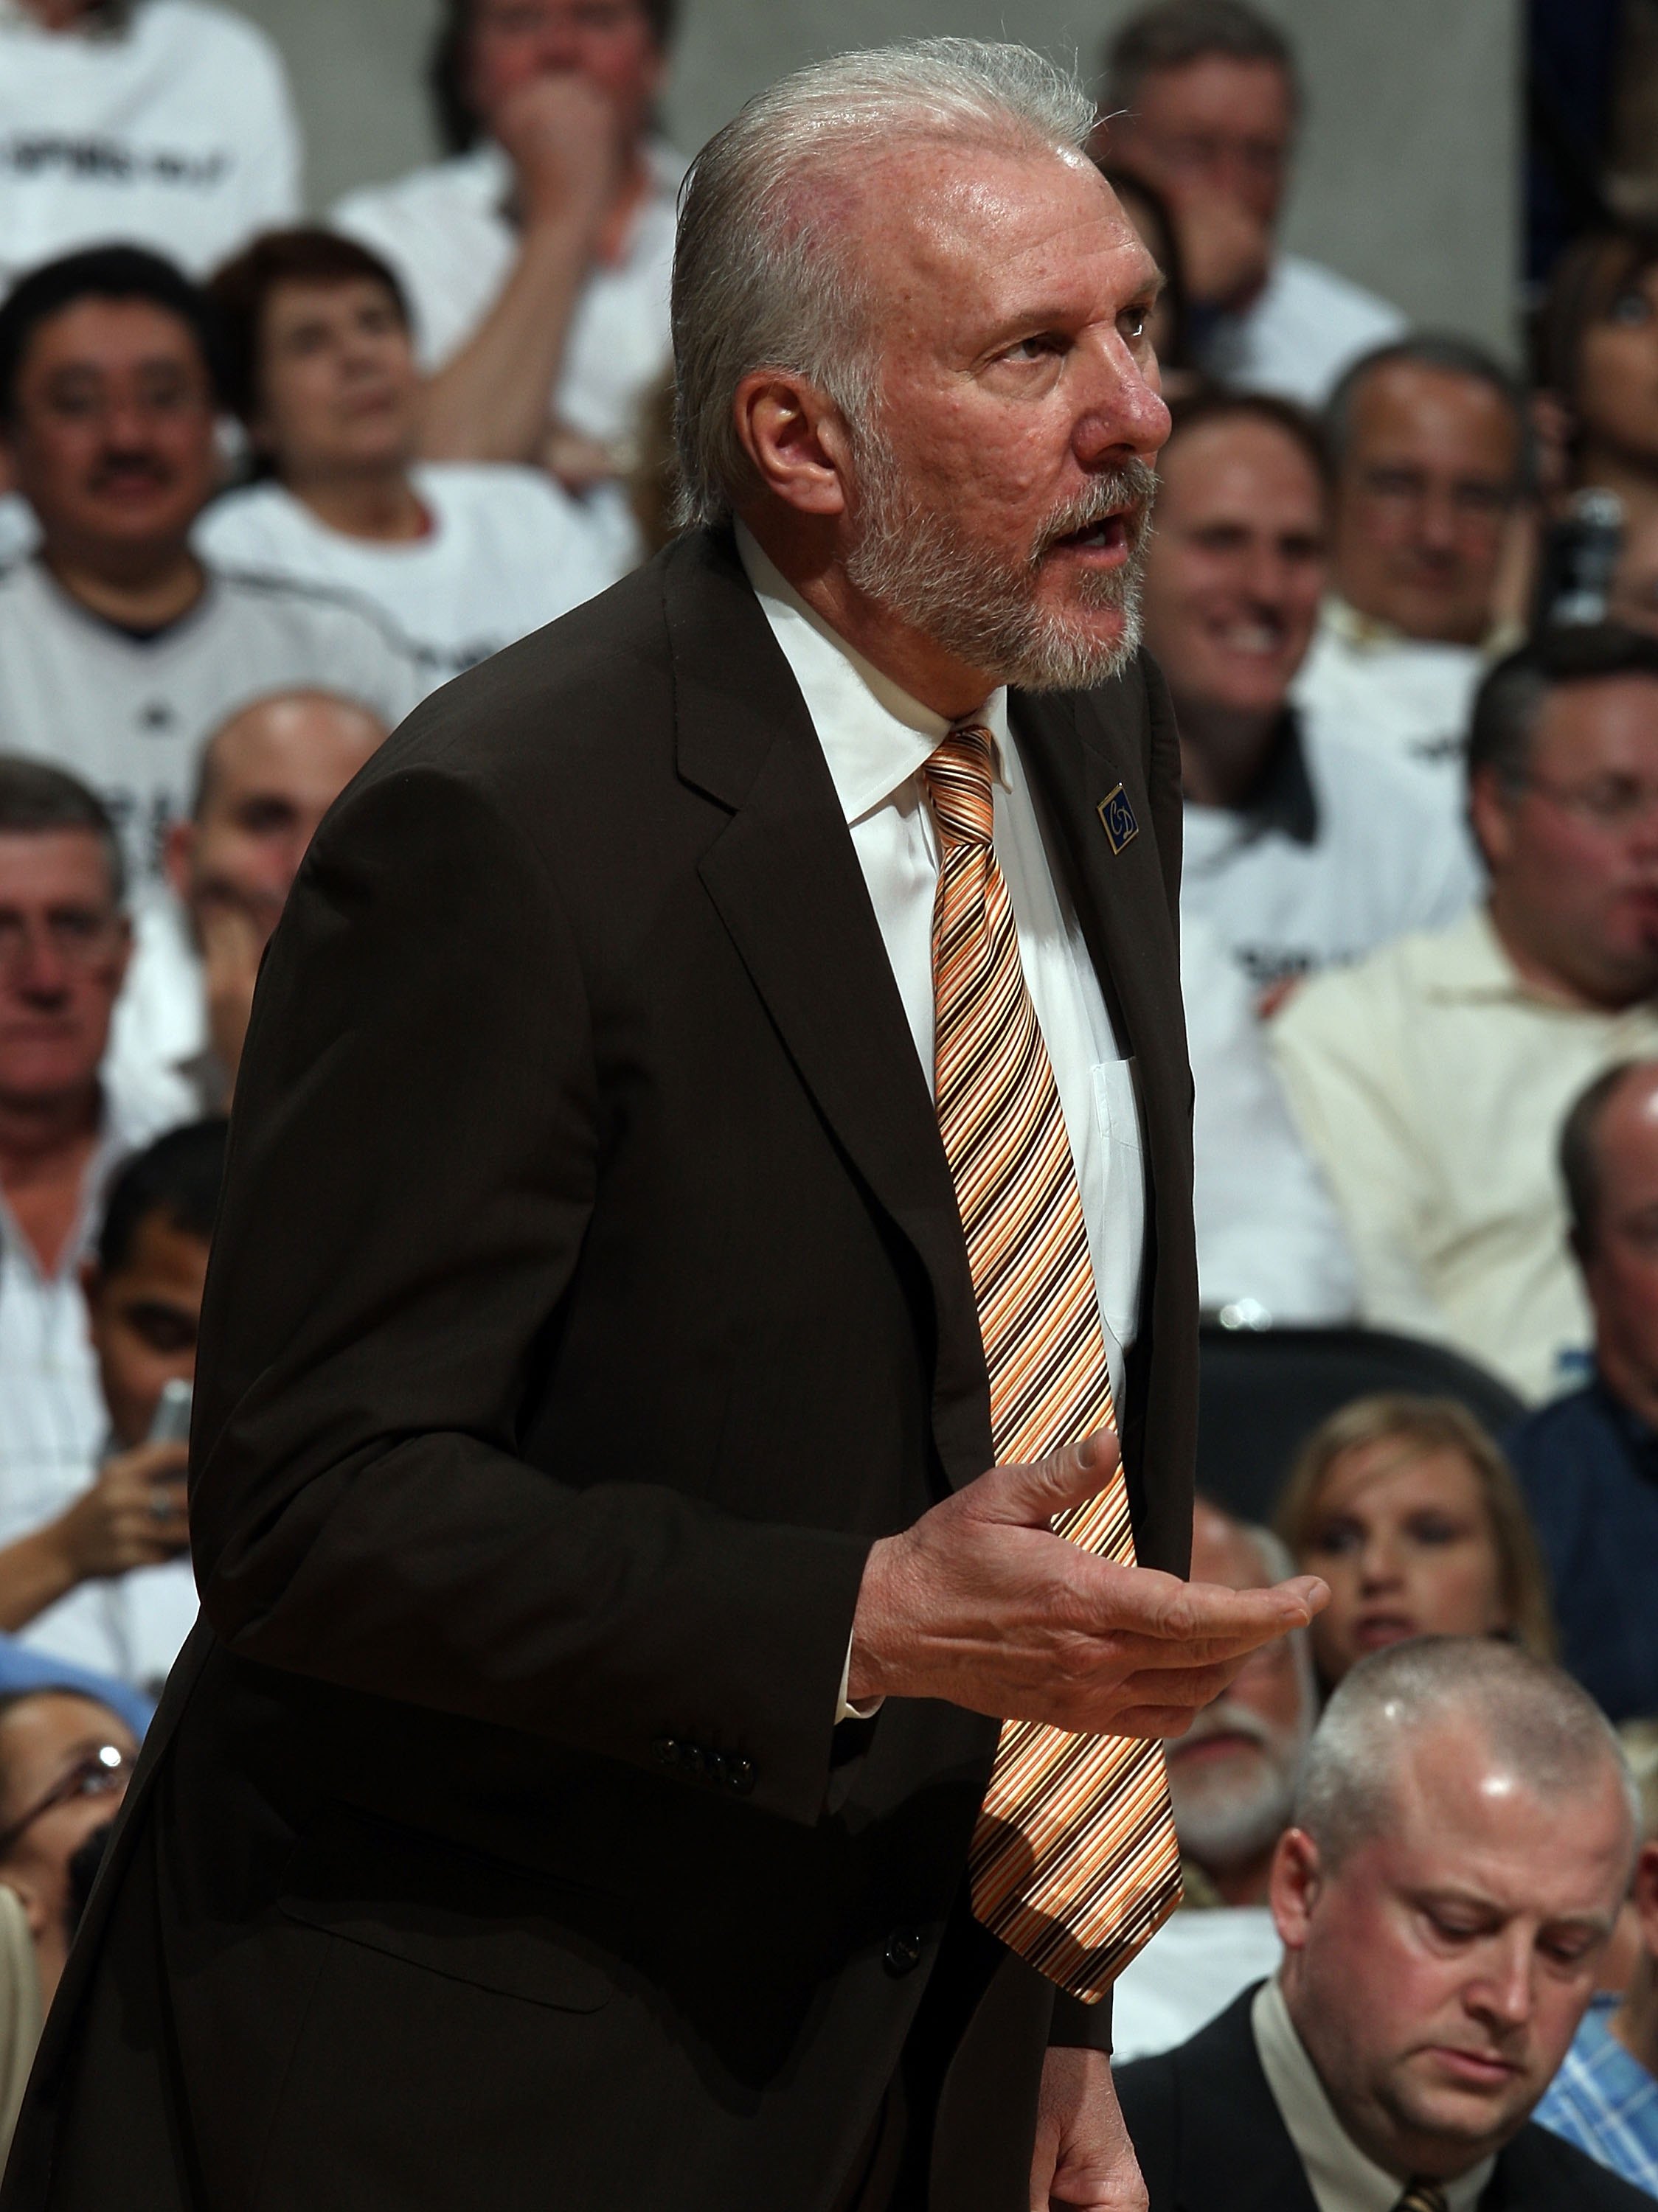 SAN ANTONIO - APRIL 20:  Head coach Gregg Popovich of the San Antonio Spurs during play against the Dallas Mavericks in Game Two of the Western Conference Quarterfinals during the 2009 NBA Playoffs at AT&T Center on April 20, 2009 in San Antonio, Texas. N